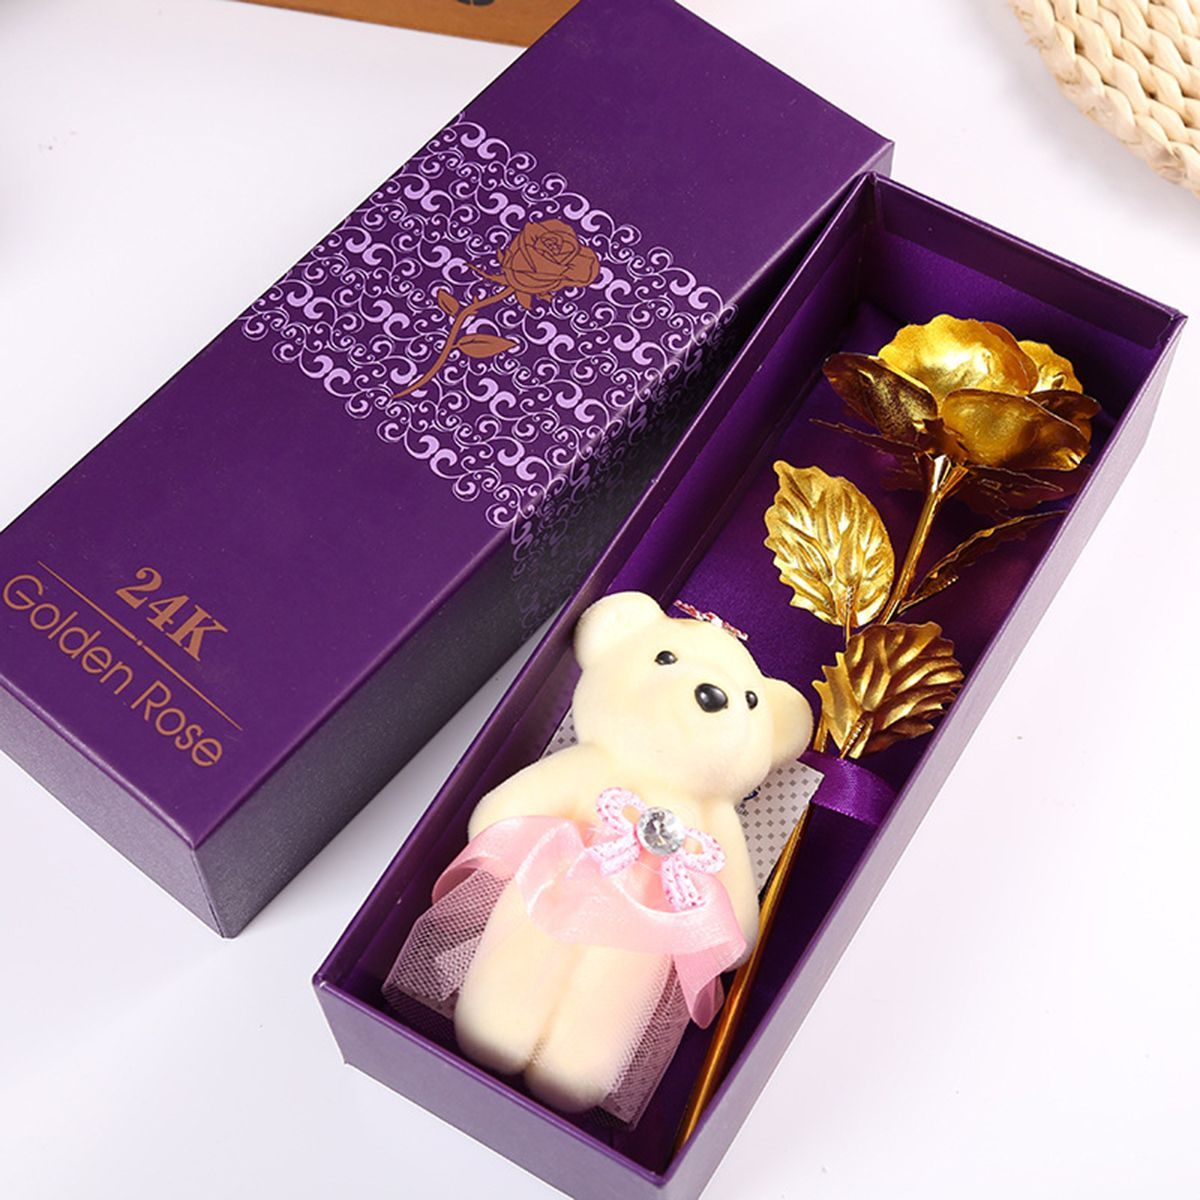 24K-Gold-Plated-Rose-Flower-Valentines-Day-Birthday-Gifts-with-Cute-Teddy-Bear-Decorations-1515761